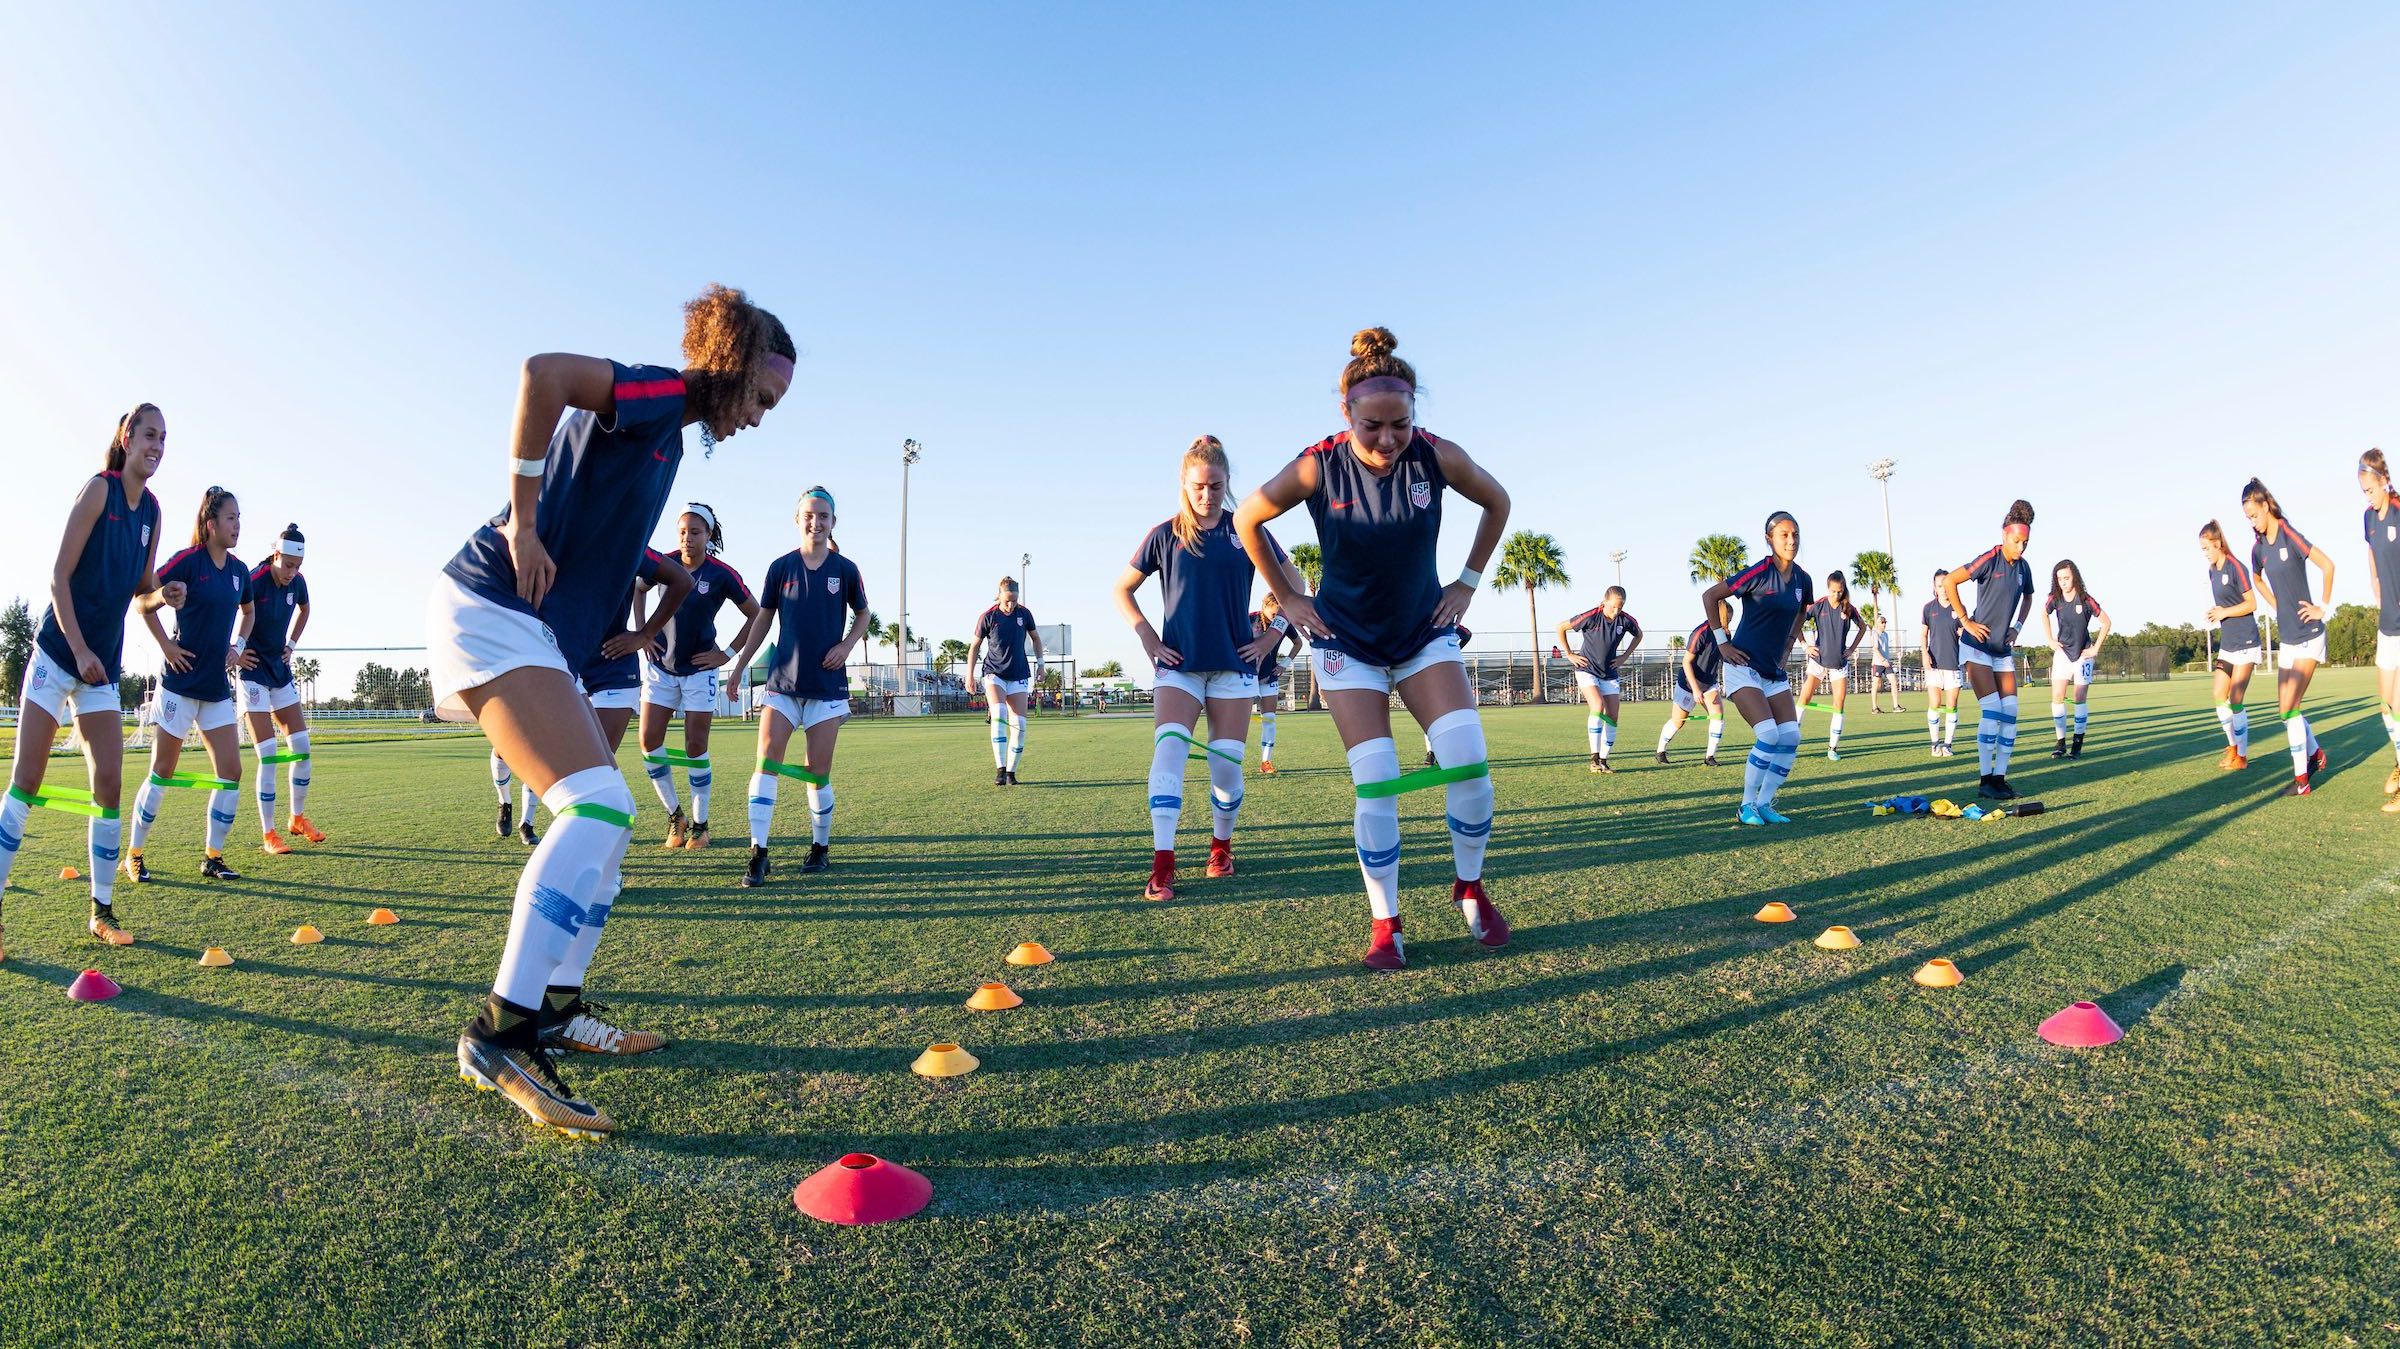 U-20 USWNT holding training camp with roster of 18 youth players, 4